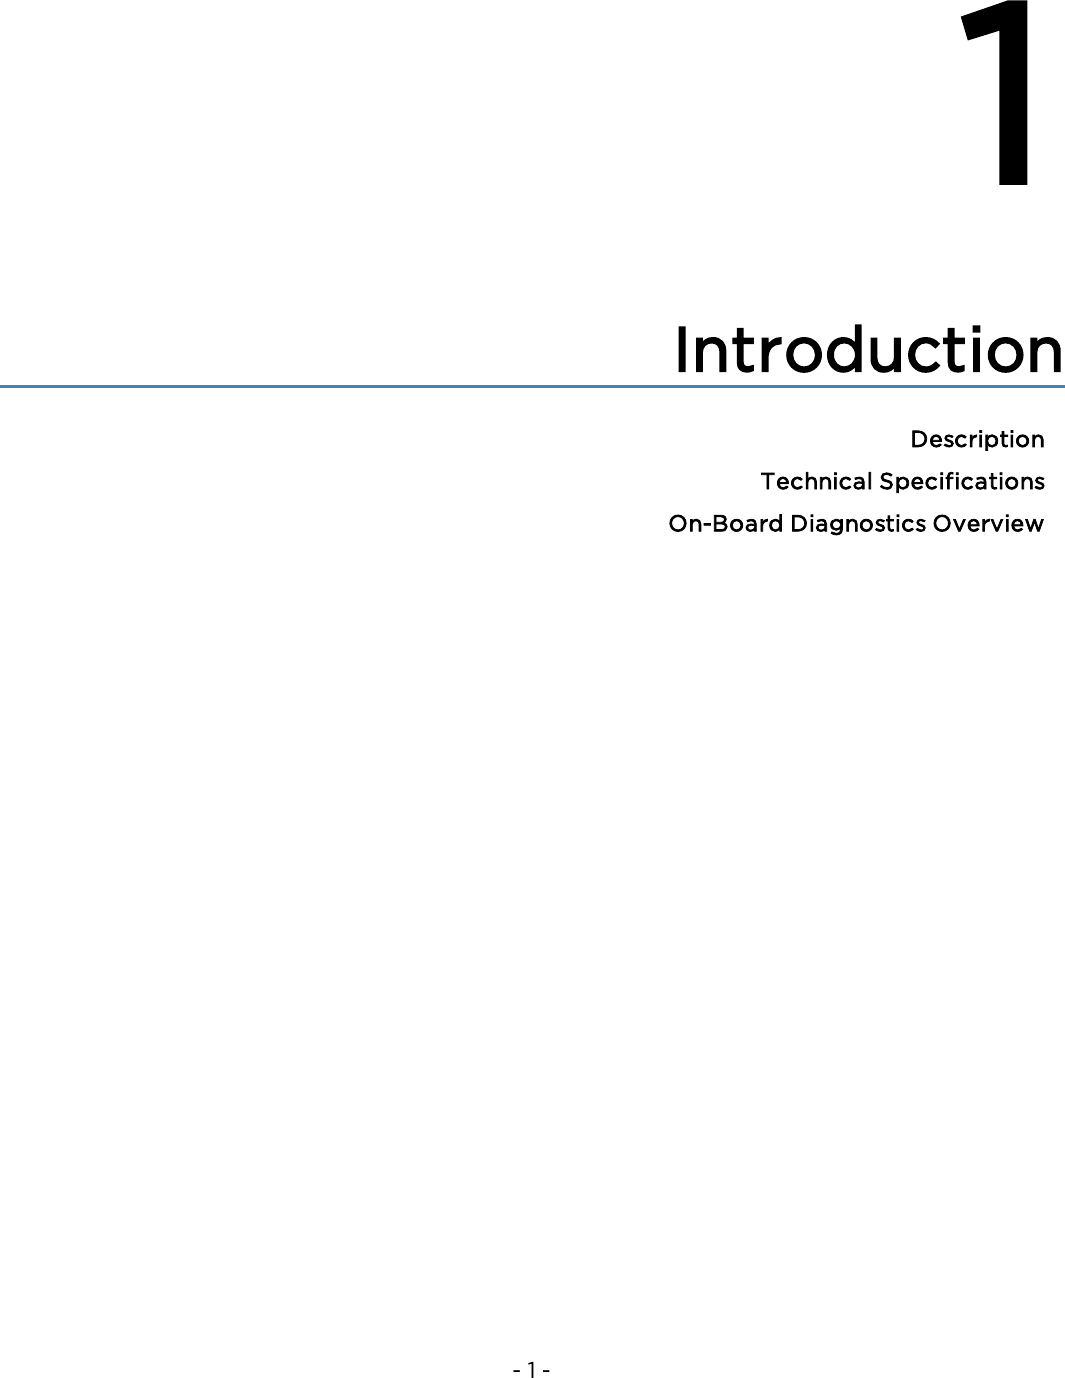 - 1 -1IntroductionDescriptionTechnical SpecificationsOn-Board Diagnostics Overview